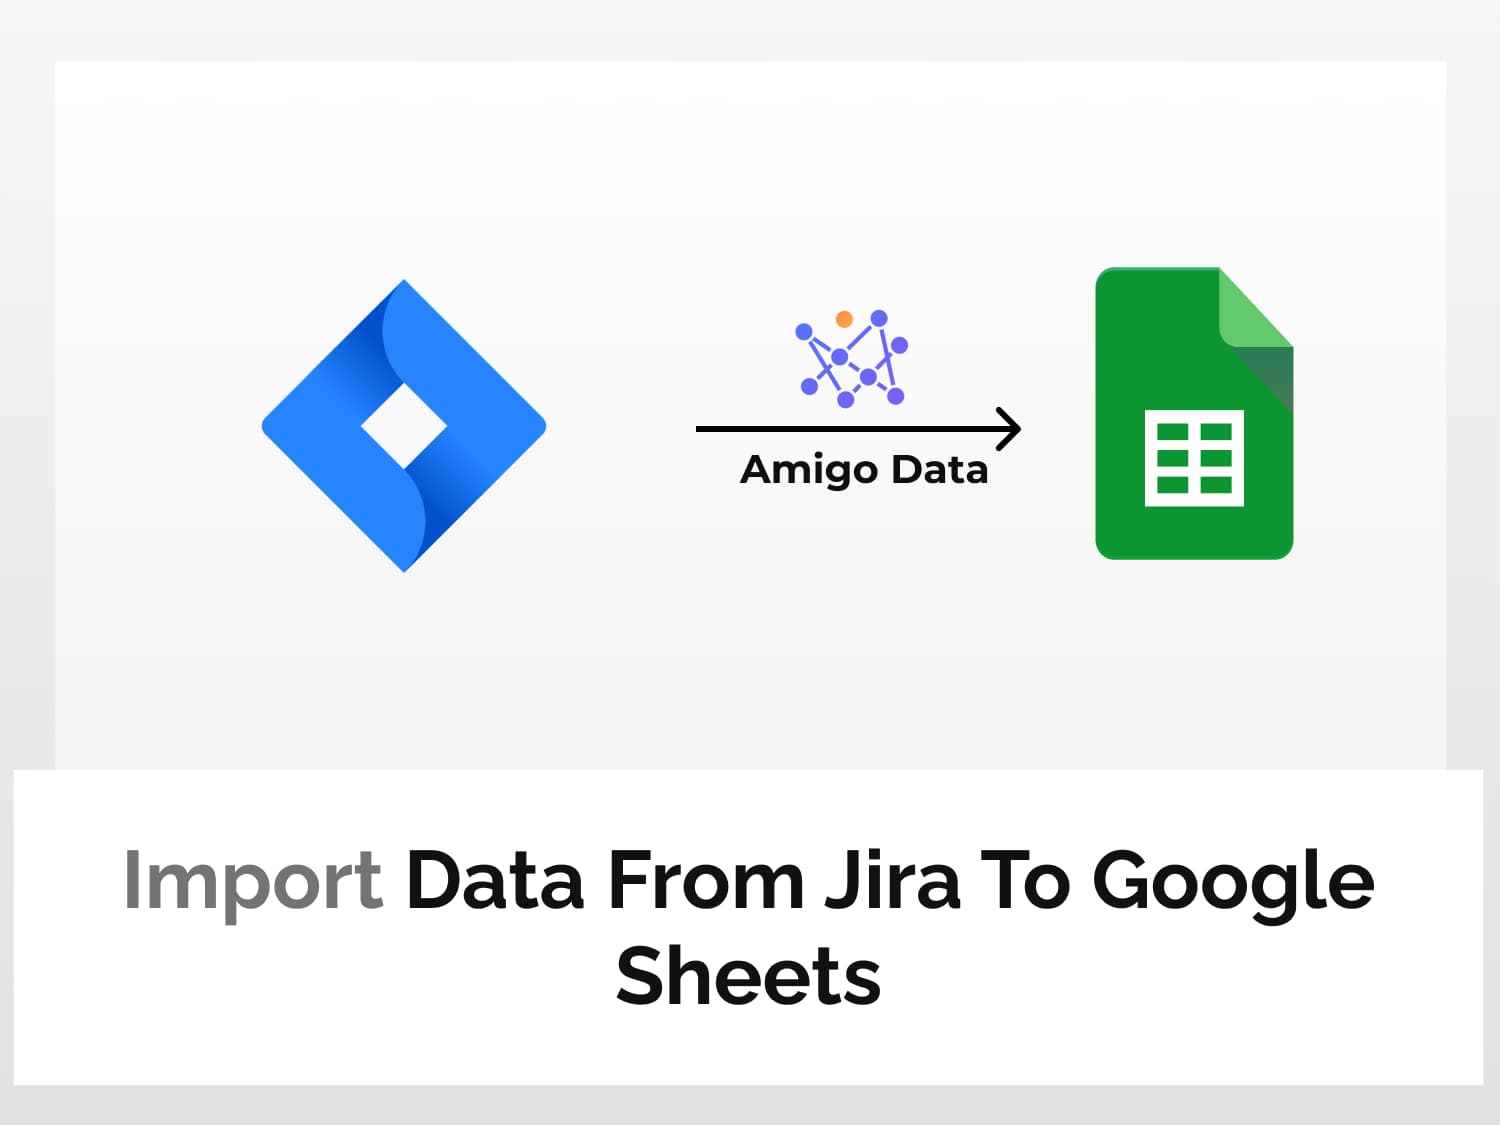 Connect Jira to Google Sheets and improt data from Jira to Google Sheets